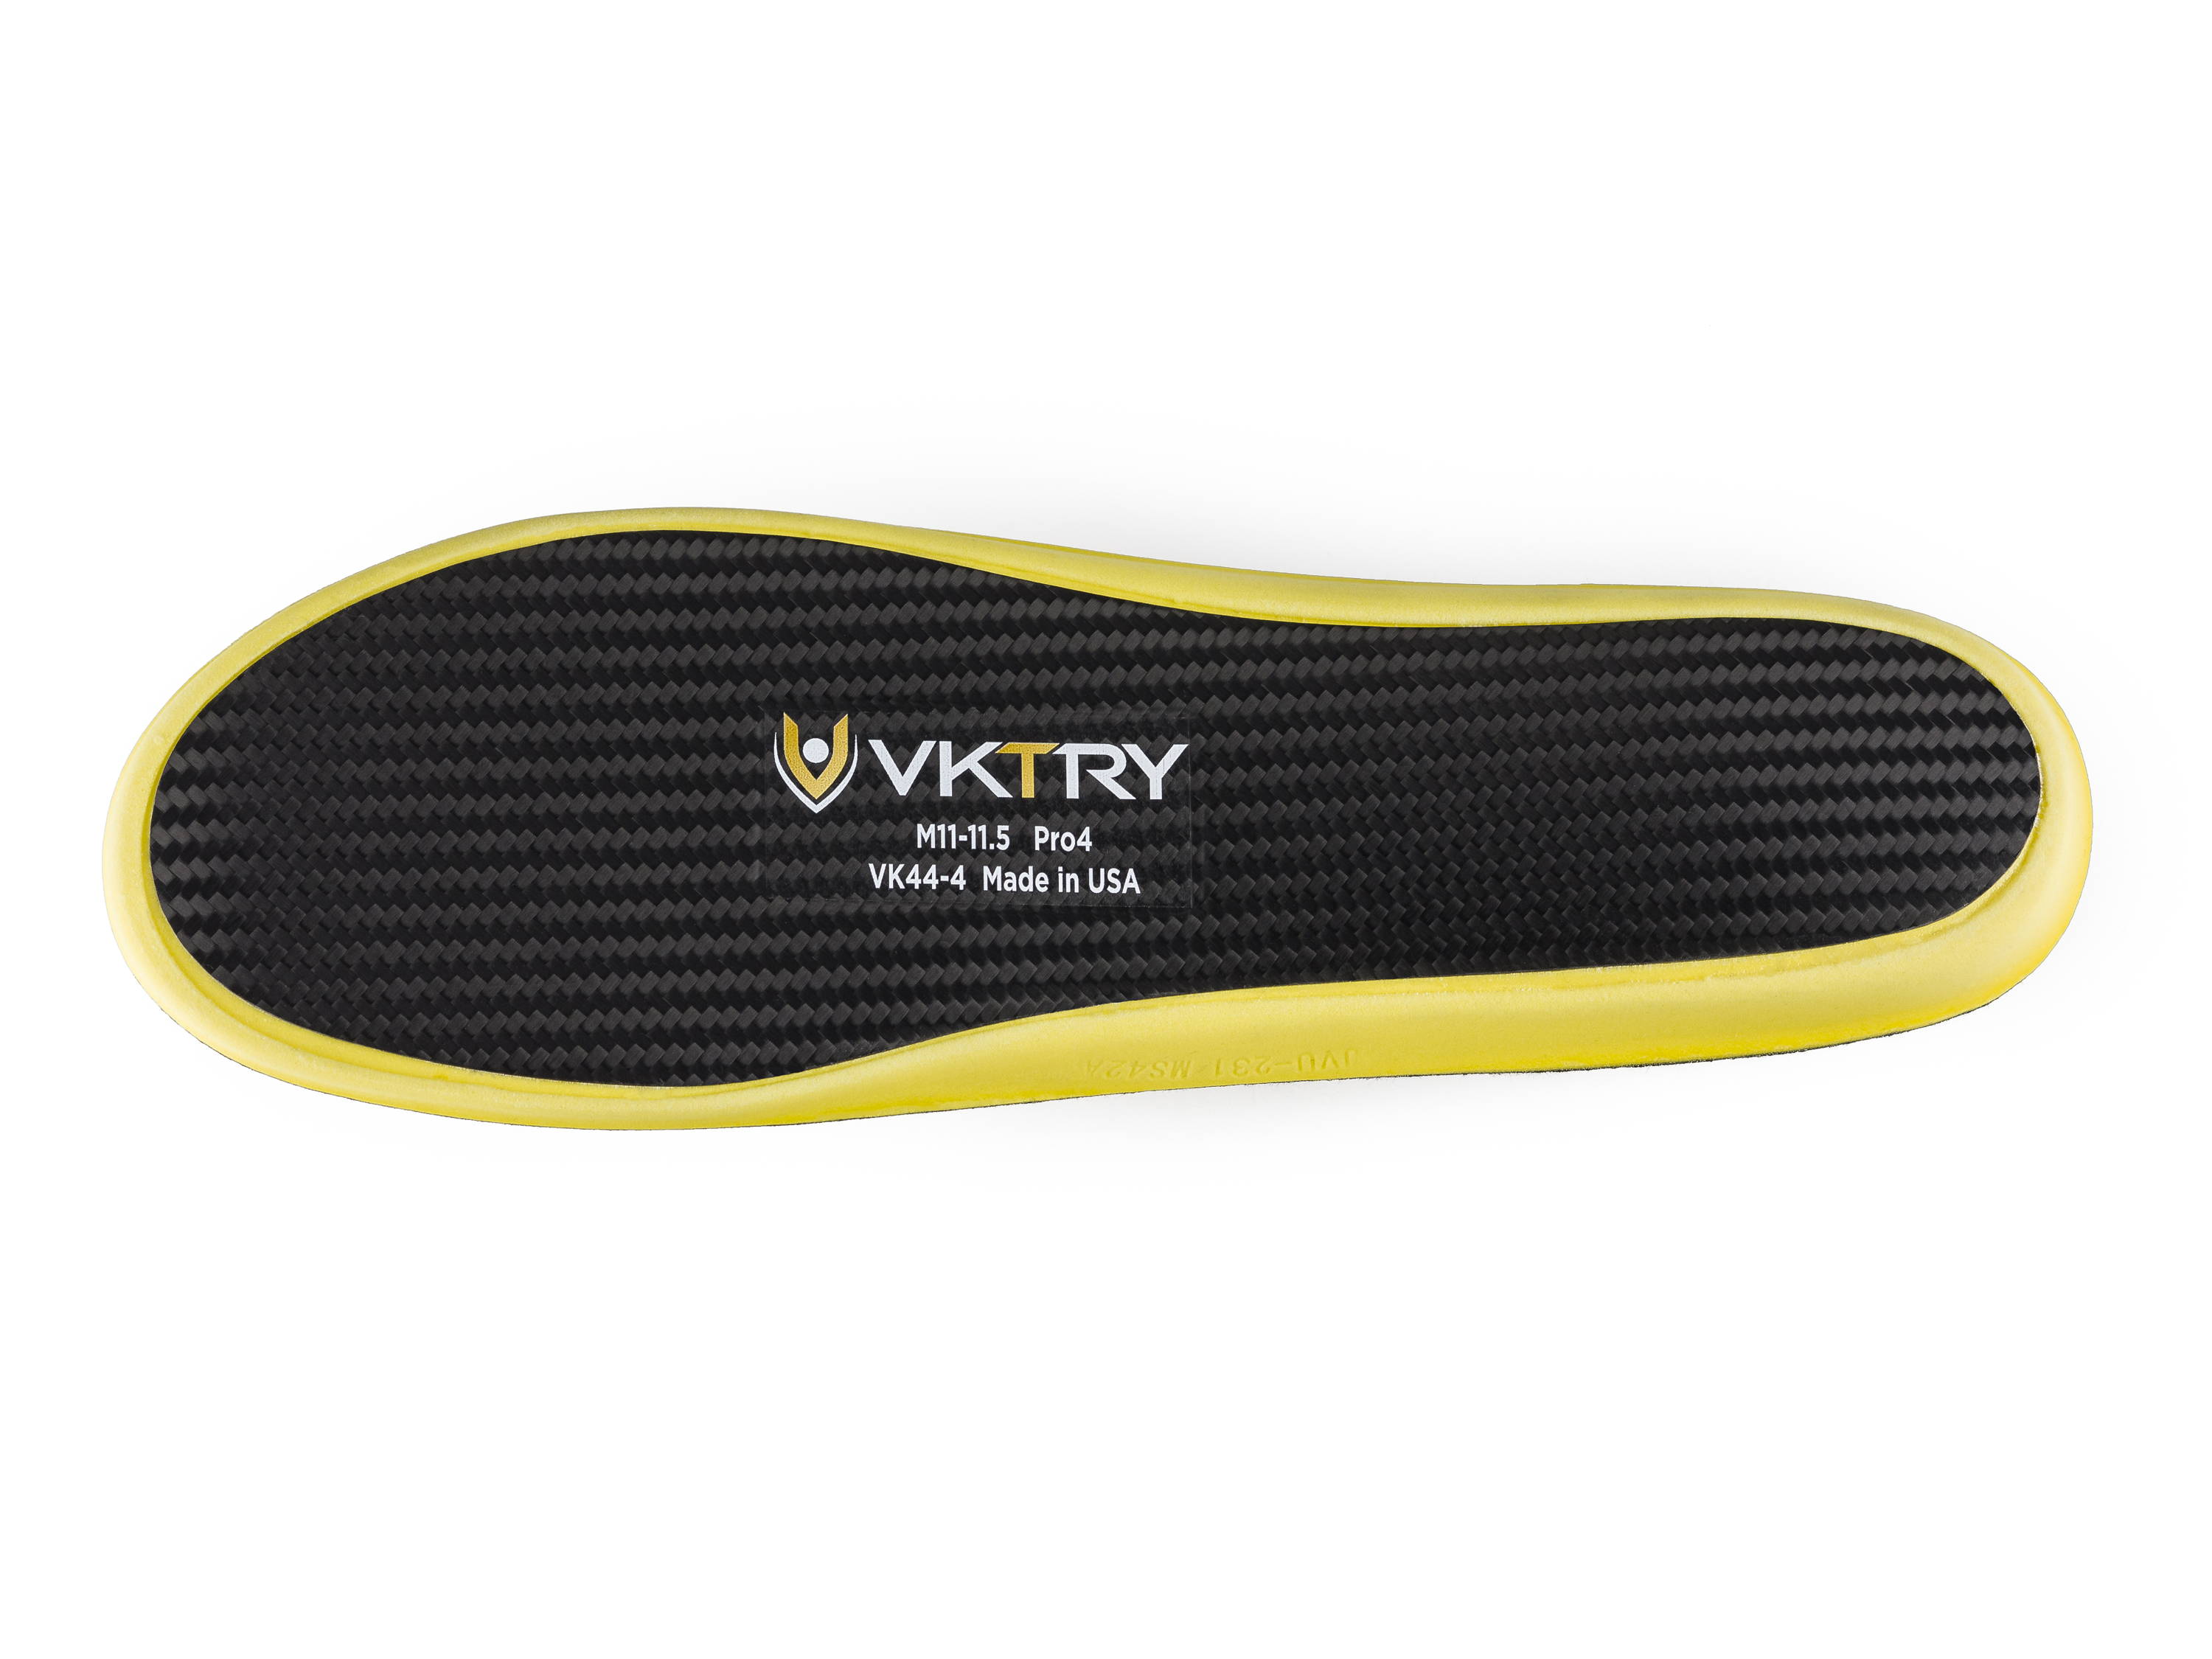 vktry insoles for football cleats